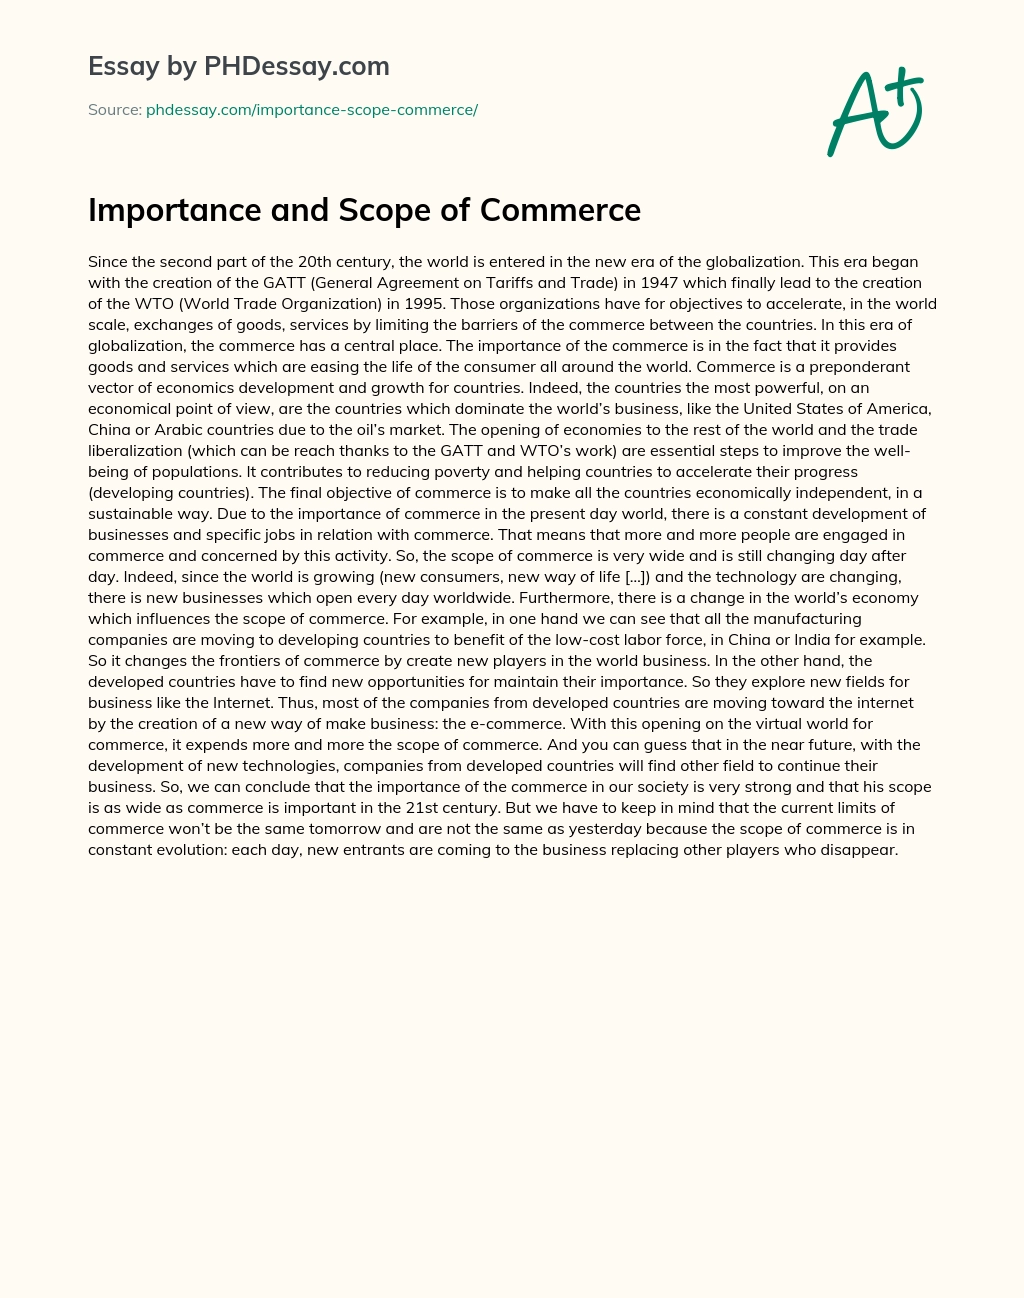 Importance and Scope of Commerce essay